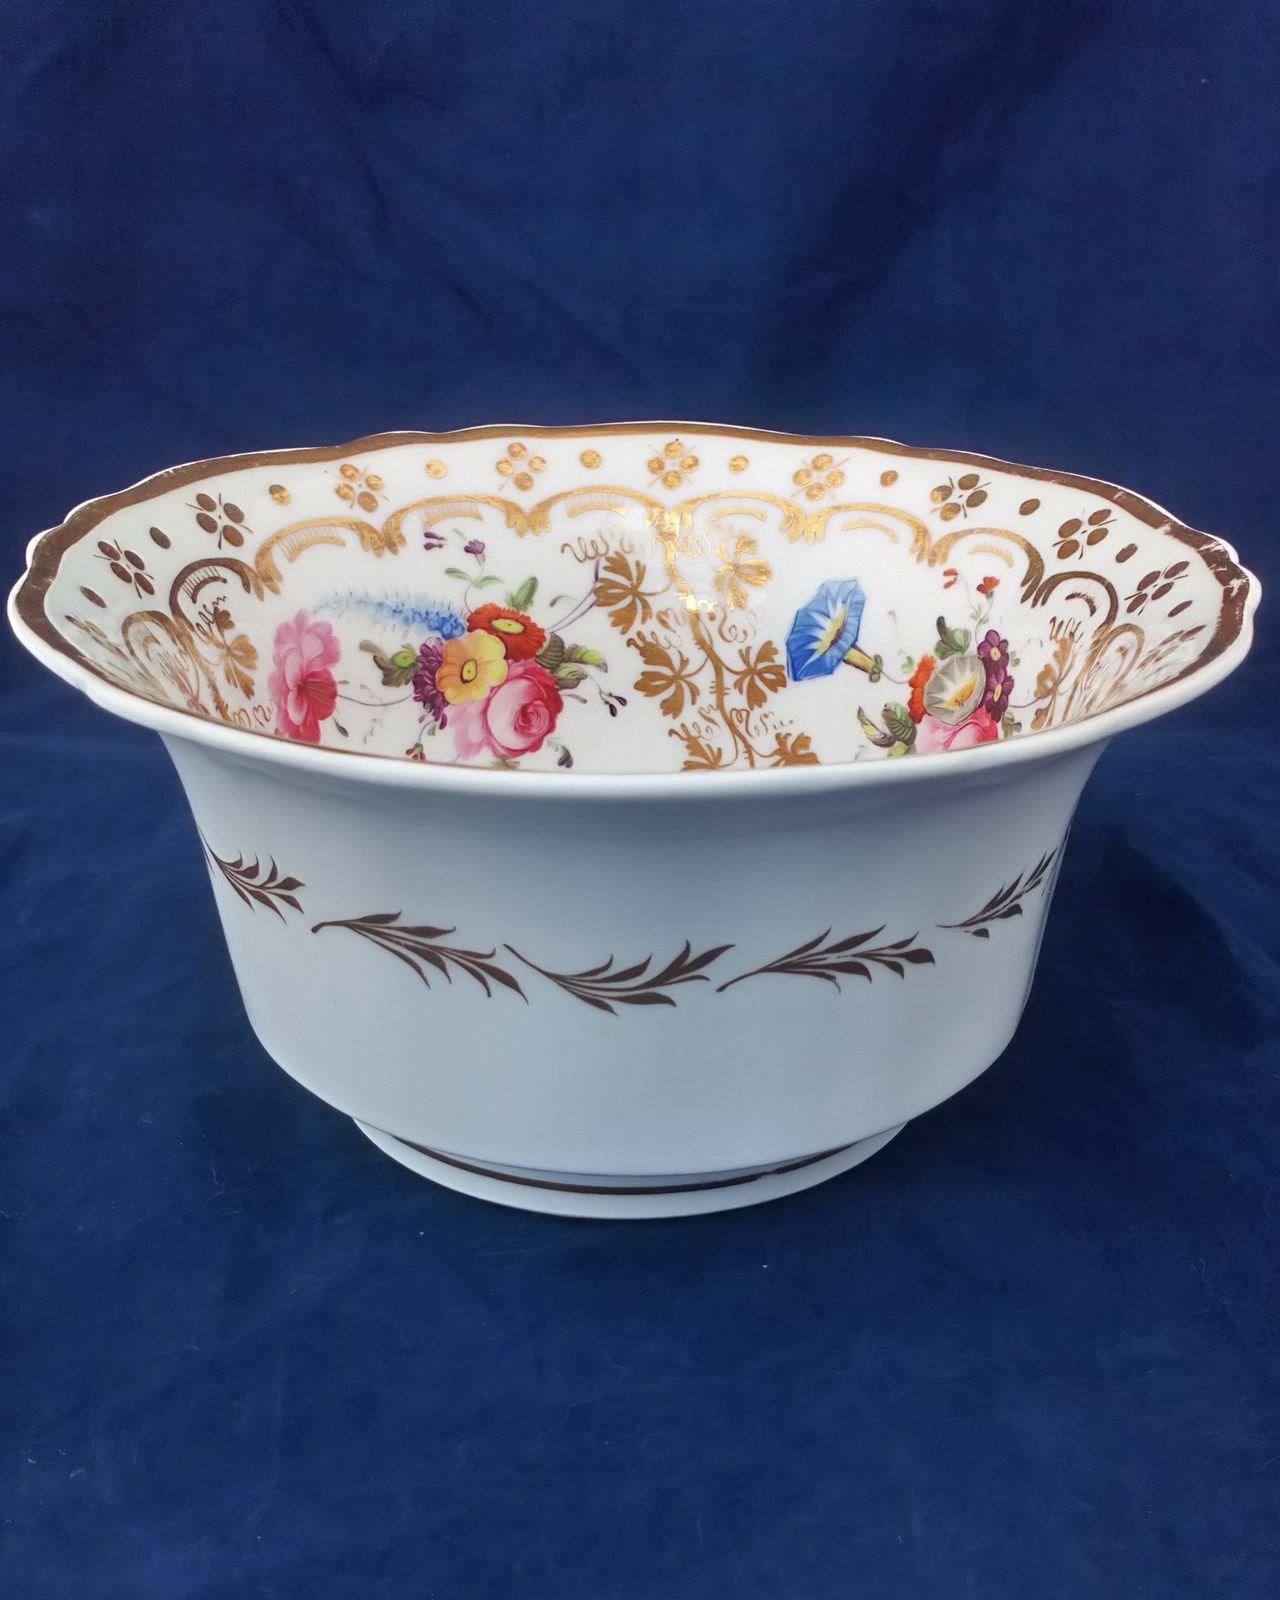 Antique John and William Ridgway porcelain bowl or slop basin decorated with hand painted flower sprays fluted old English or Royal shape circa 1825.